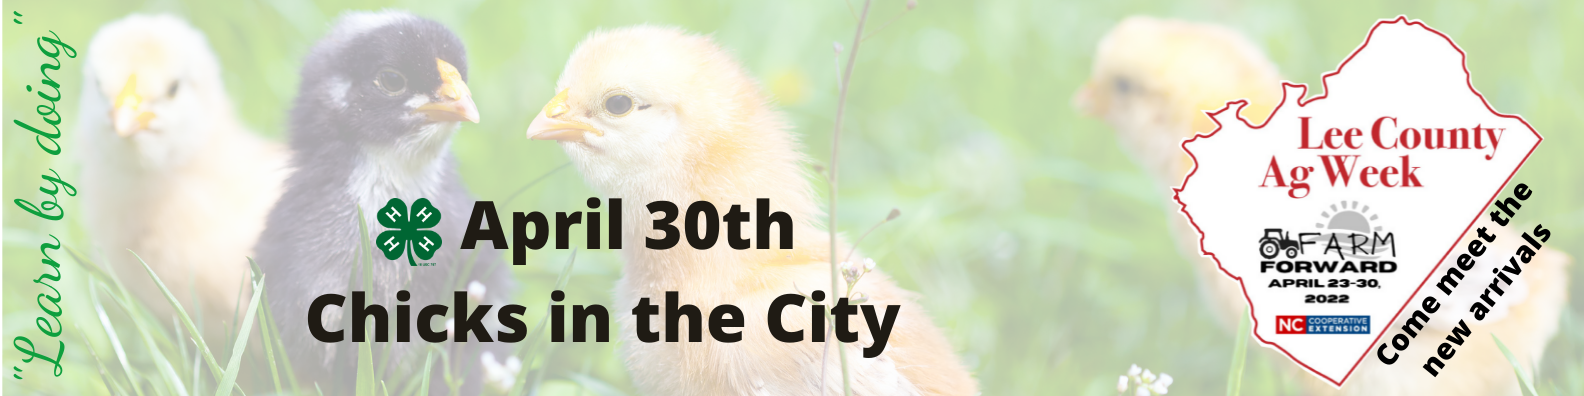 Chicks in the city april 30